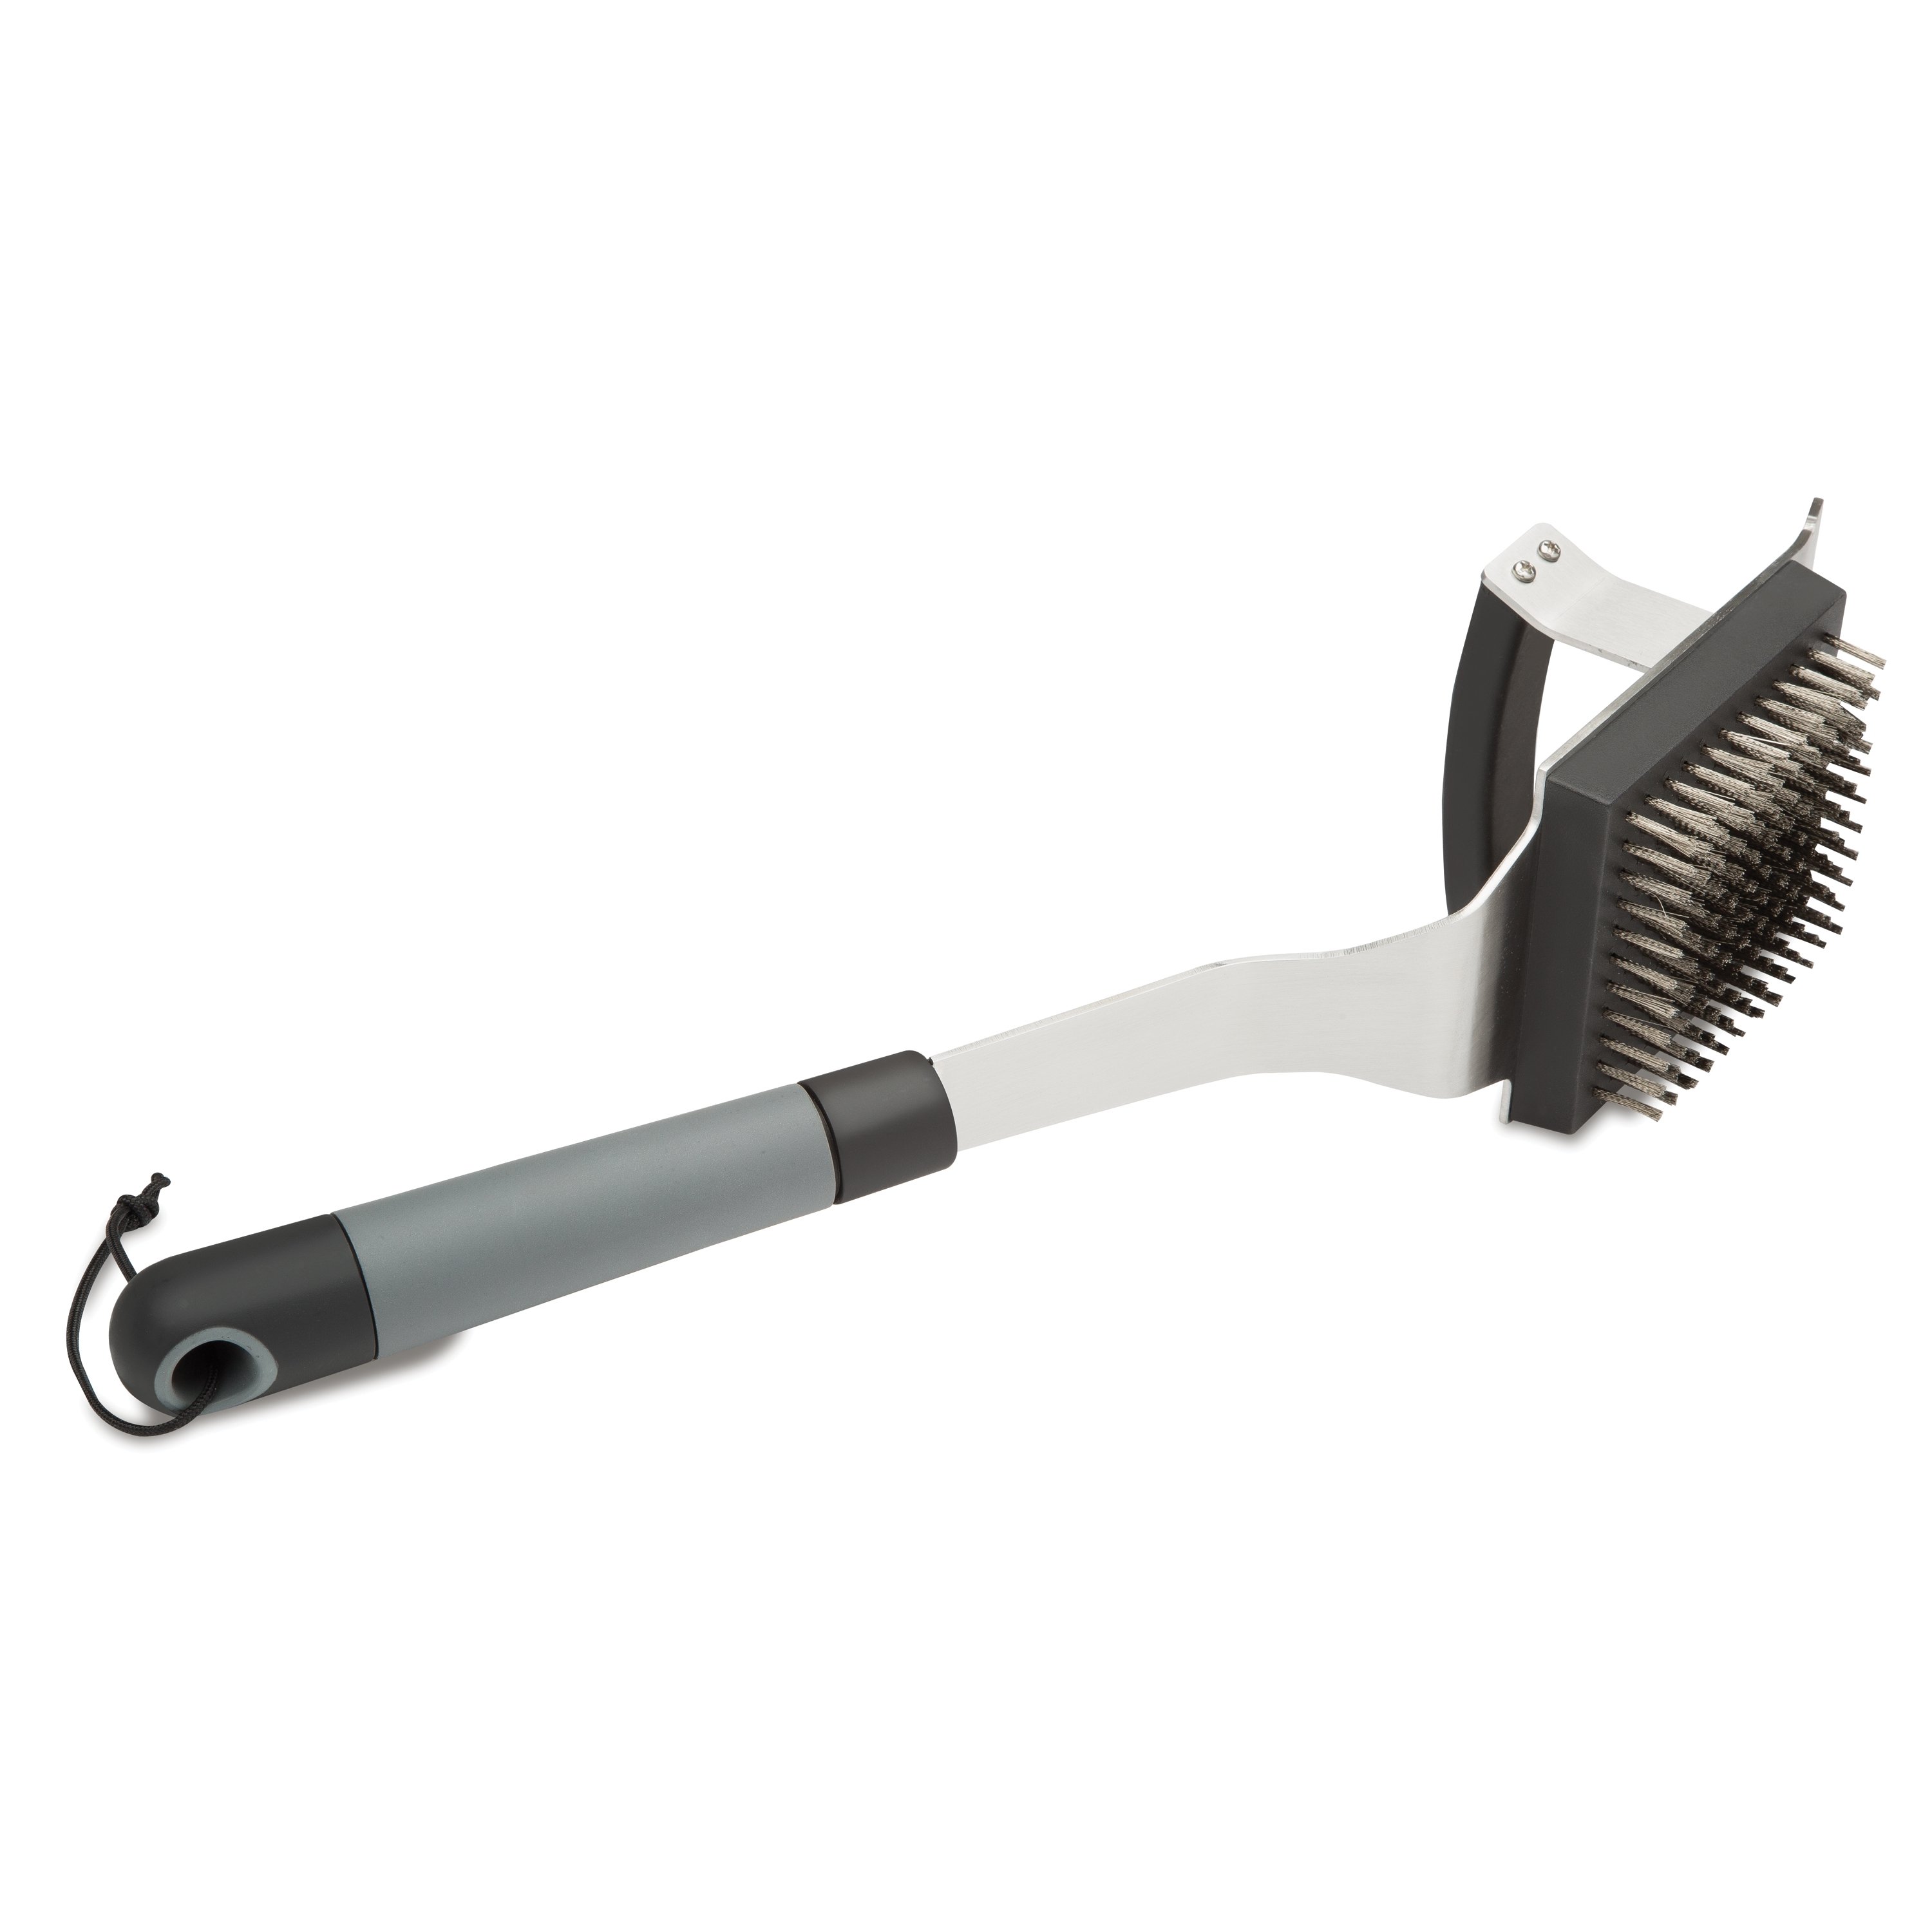 Grill Grate- Grate Grill Brush w/ 15 Handle